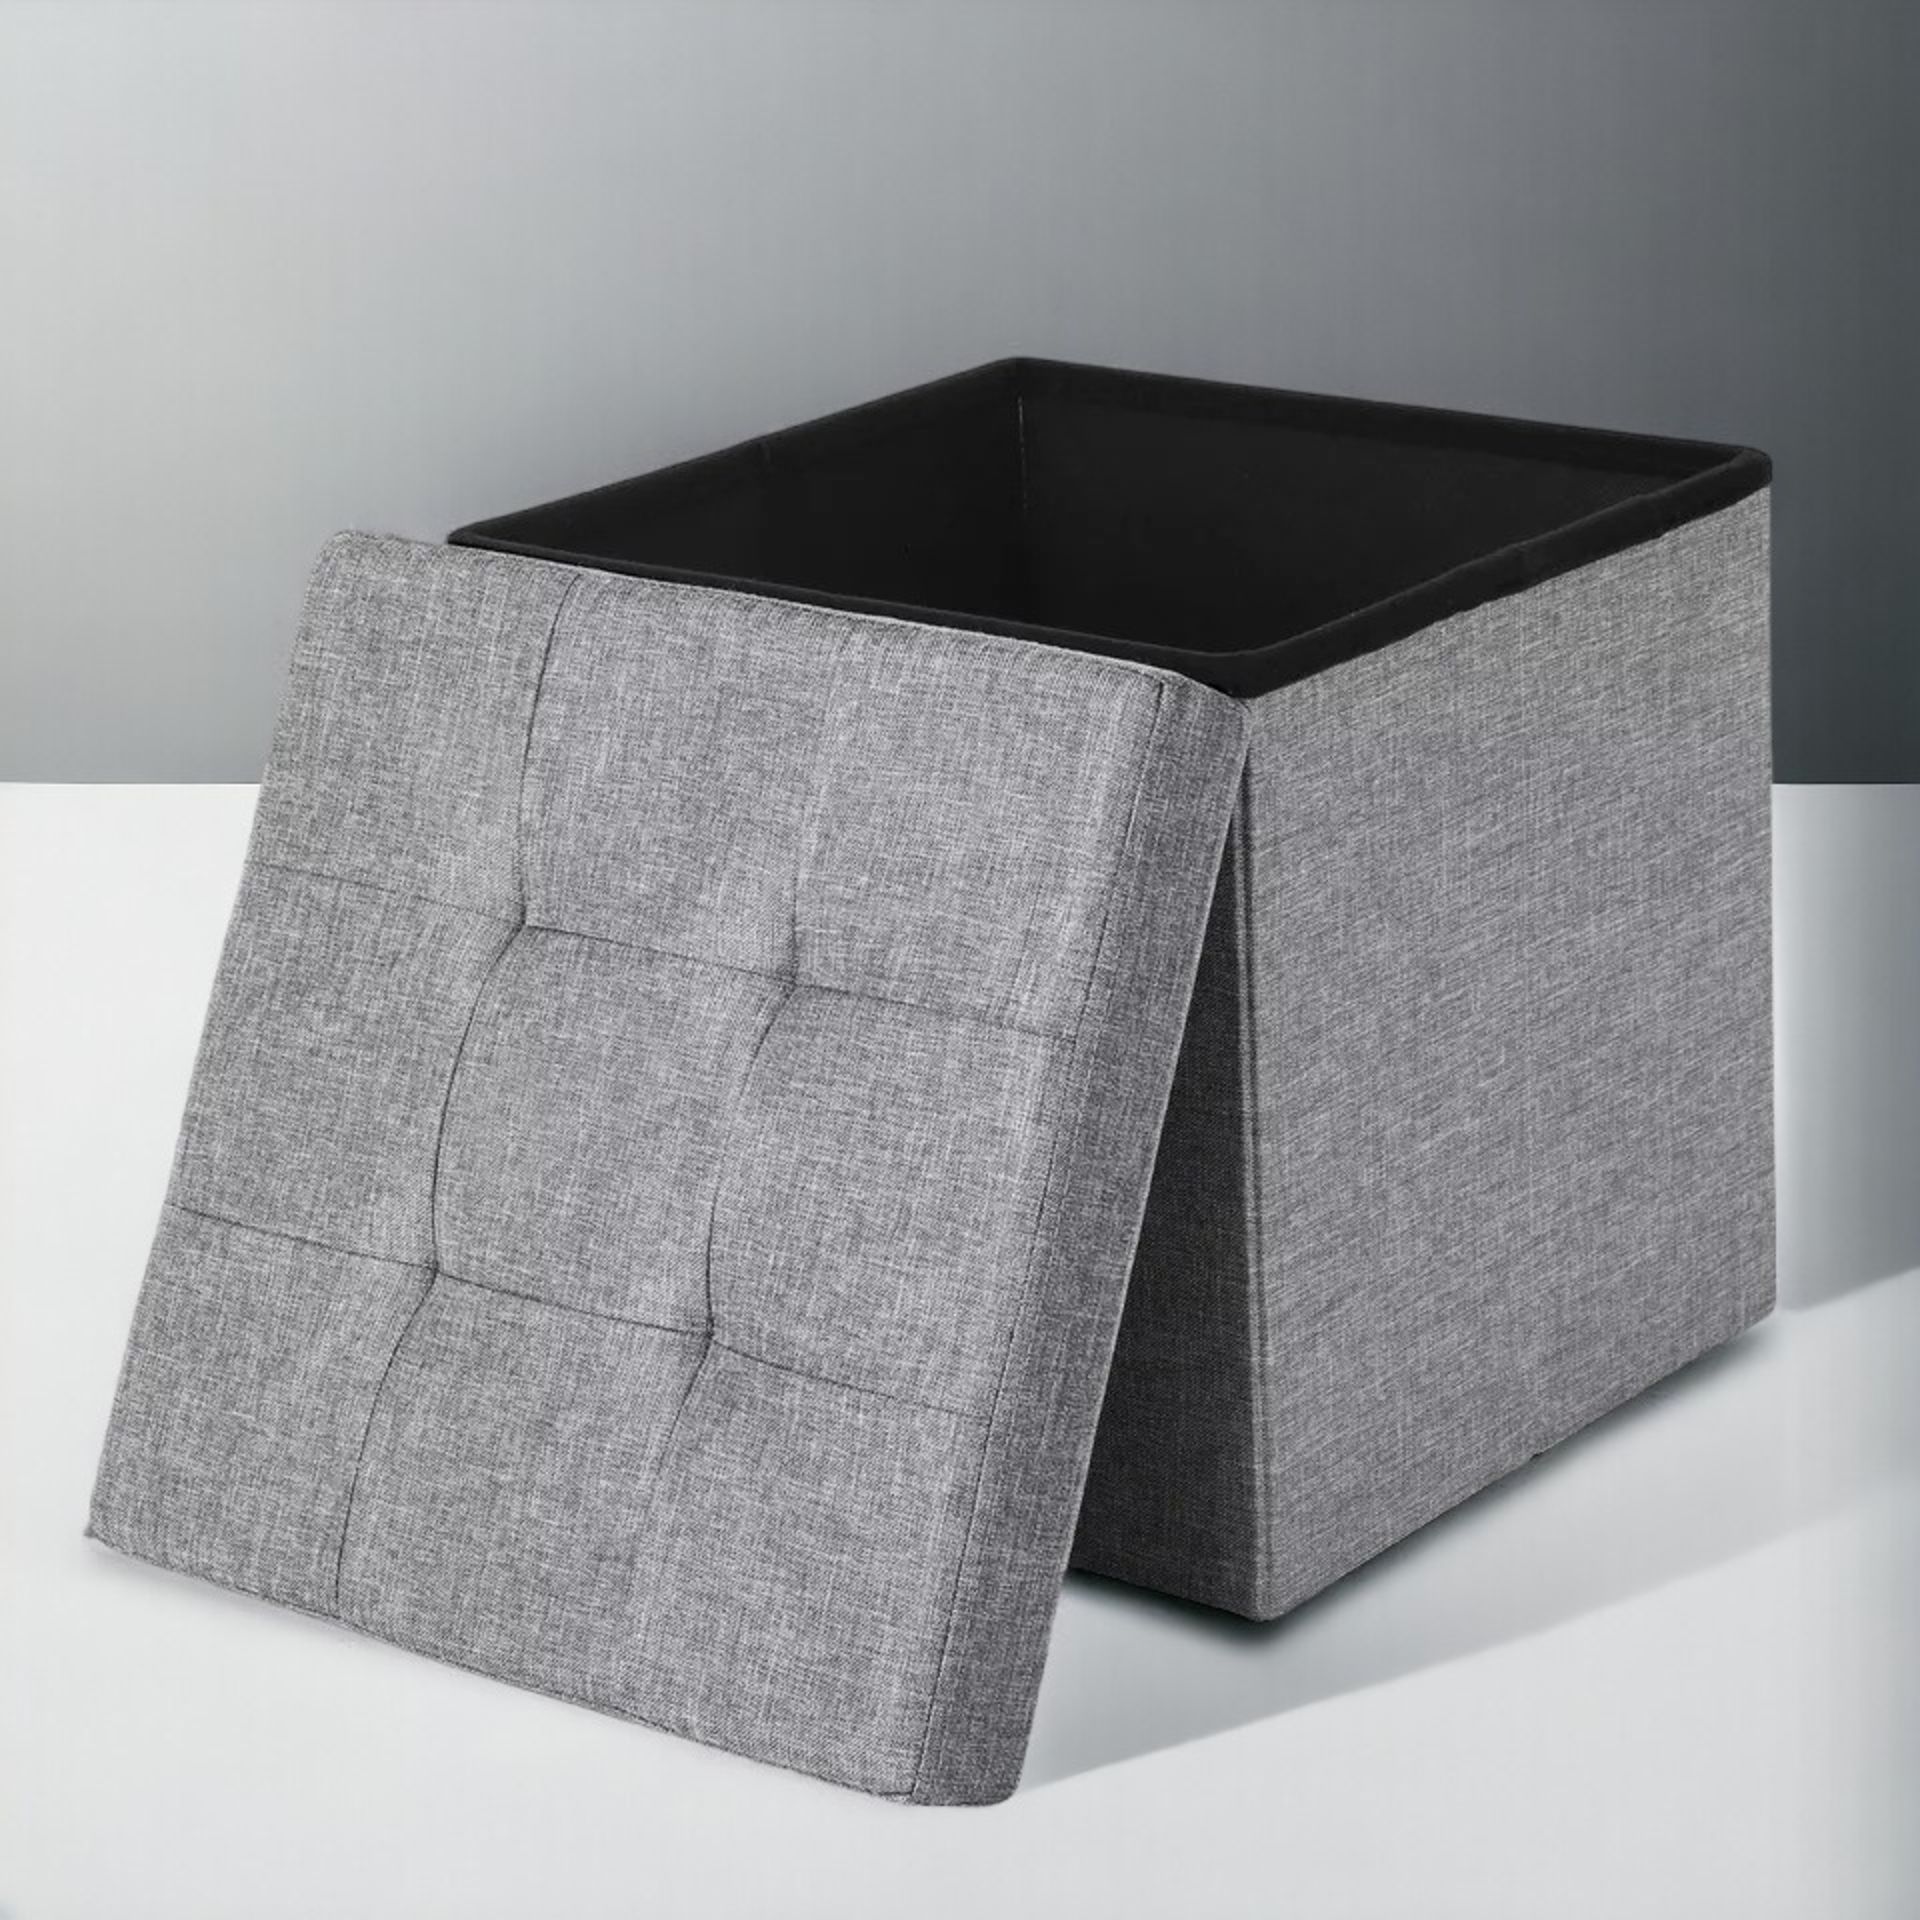 FREE DELIVERY - BRAND NEW SONGMICS STORAGE OTTOMAN PADDED FOLDABLE BENCH CUBE BOX